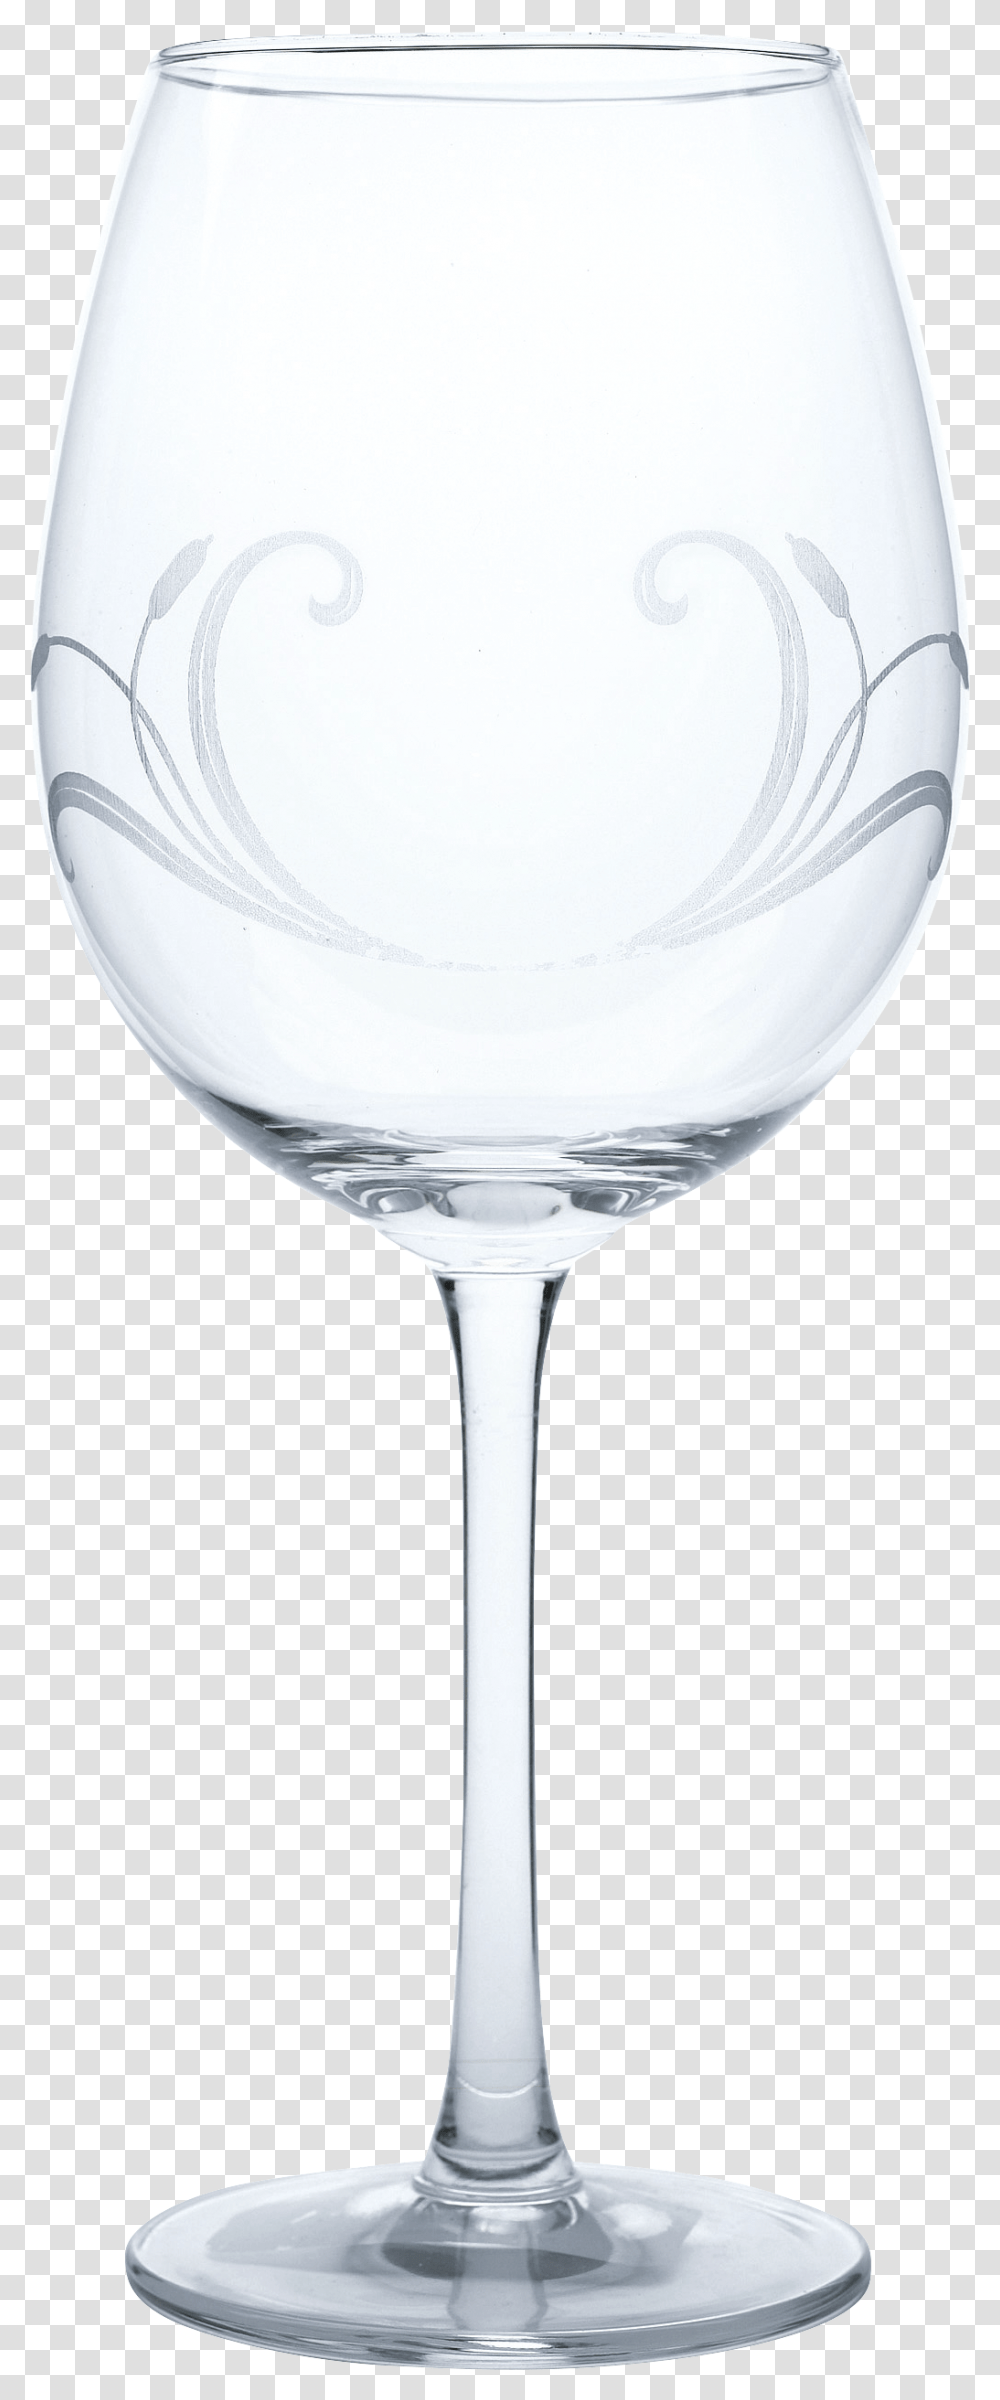 Engraving On Glass, Lamp, Goblet, Wine Glass, Alcohol Transparent Png